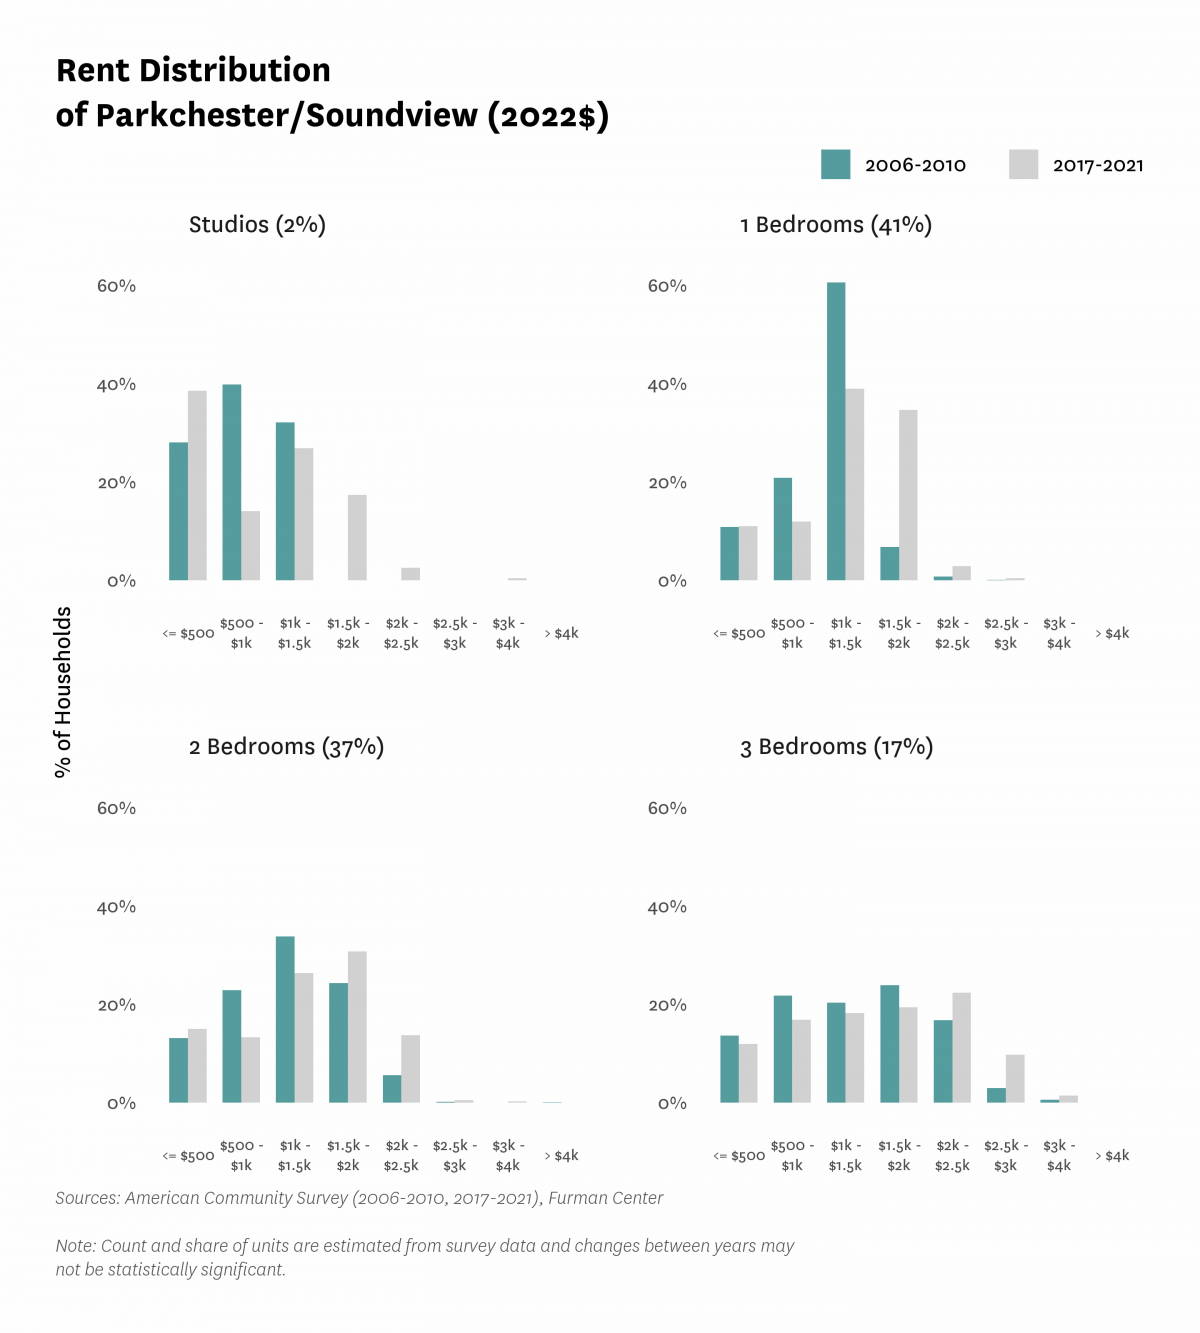 Graph showing the distribution of rents in Parkchester/Soundview in both 2010 and 2017-2021.